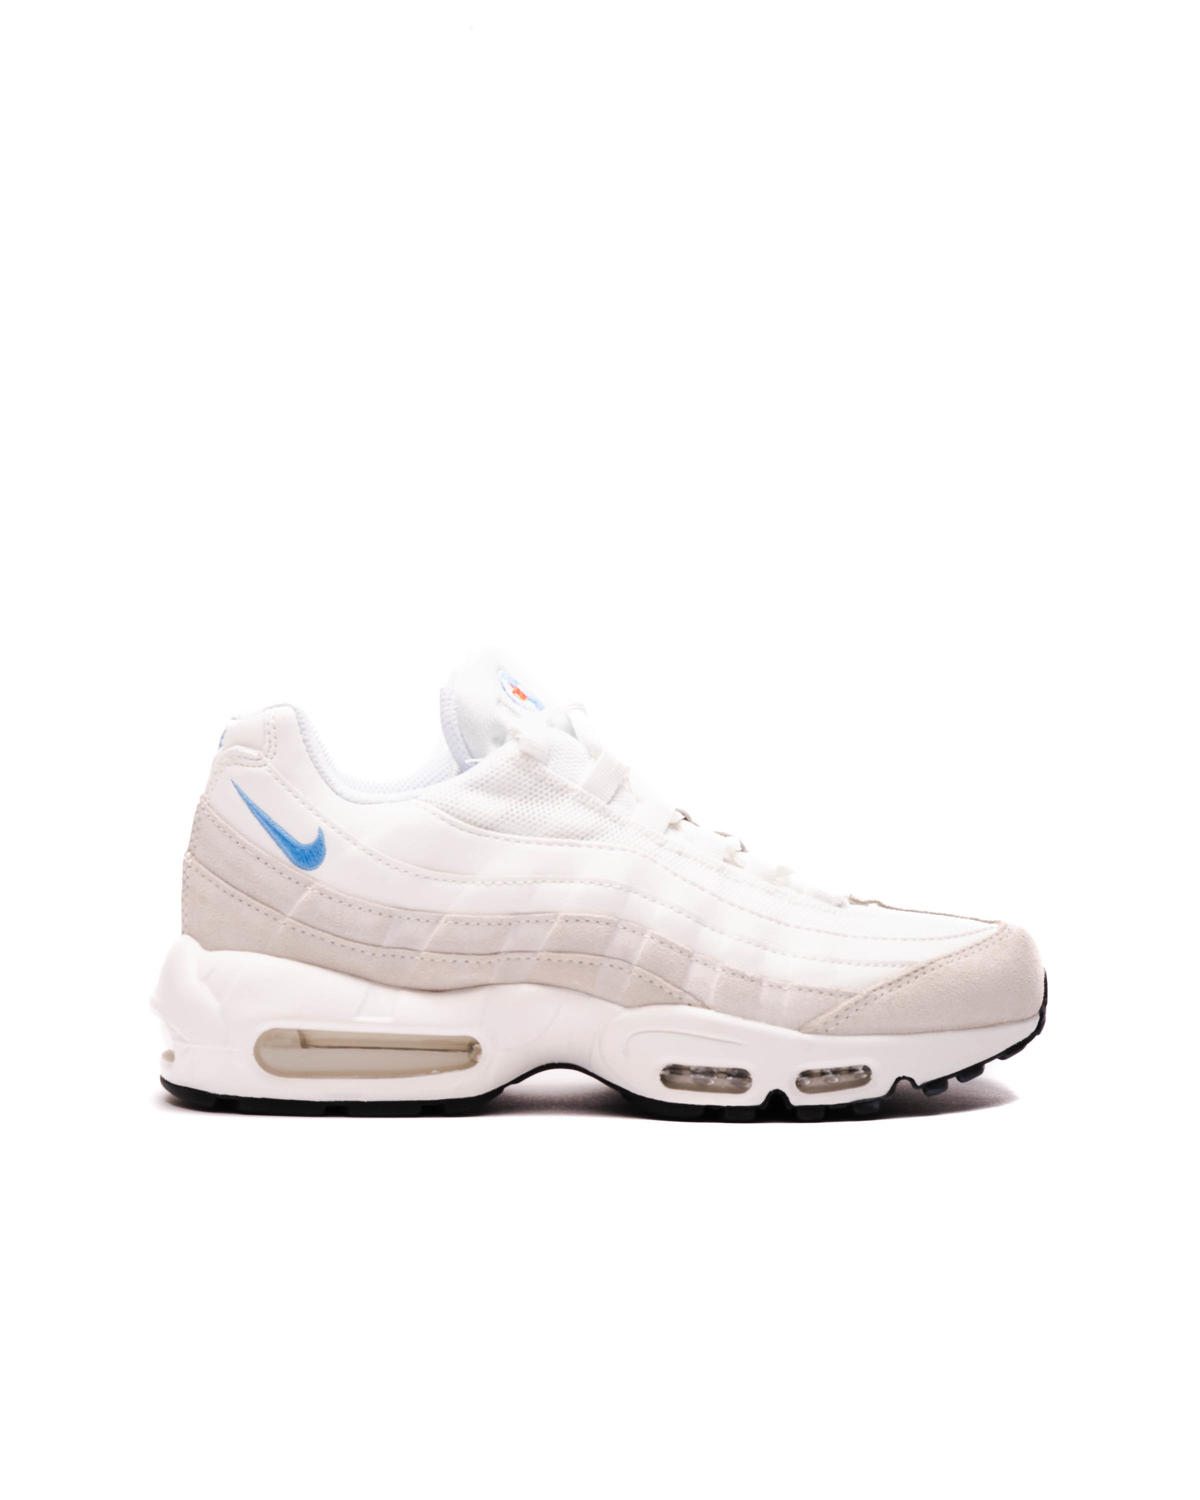 undefined | Nike WMNS AIR MAX 95